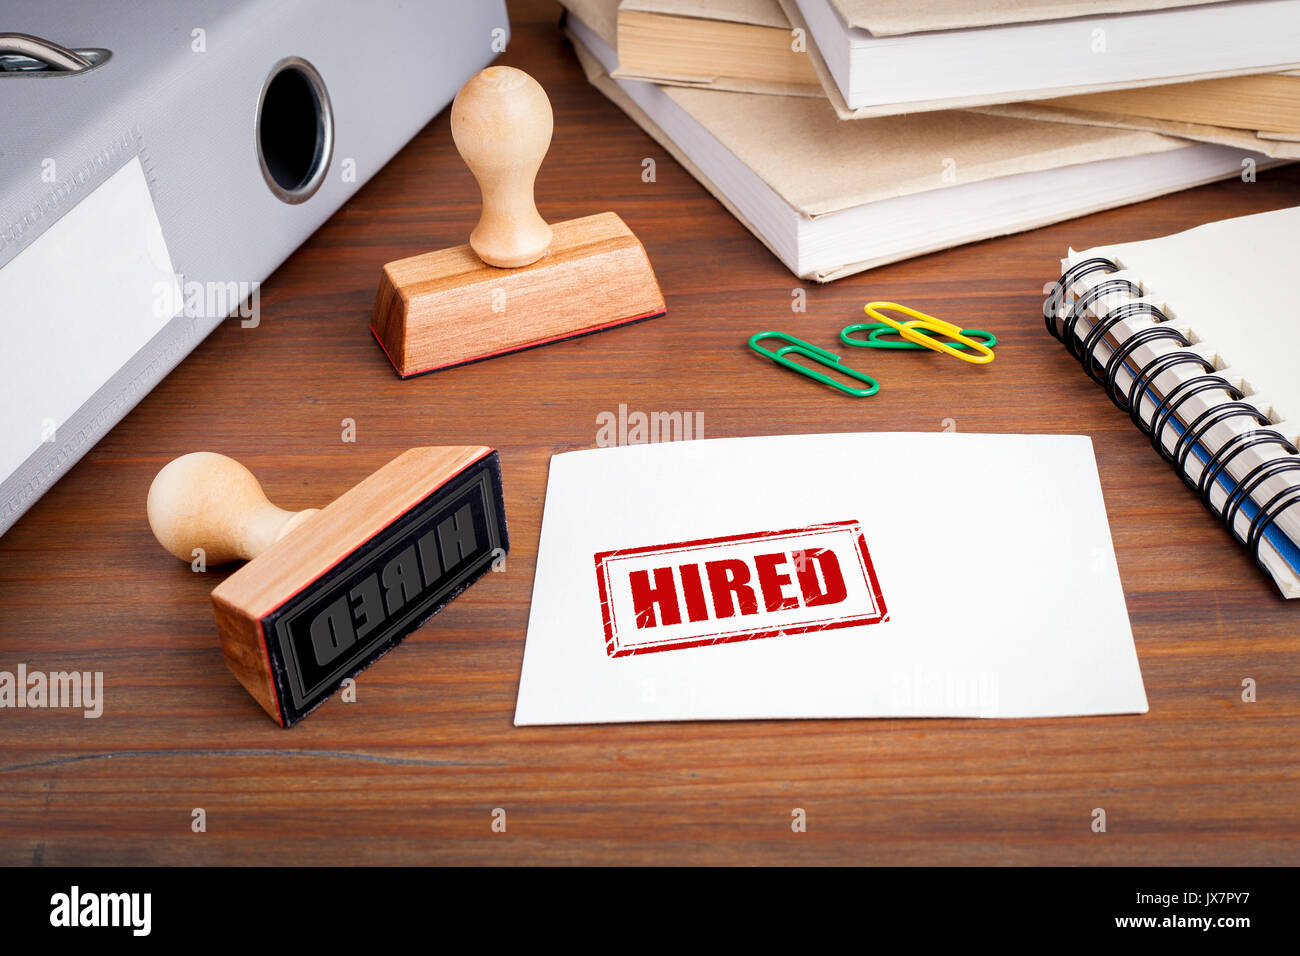 Hired. Rubber Stamp on desk in the Office. Stock Photo